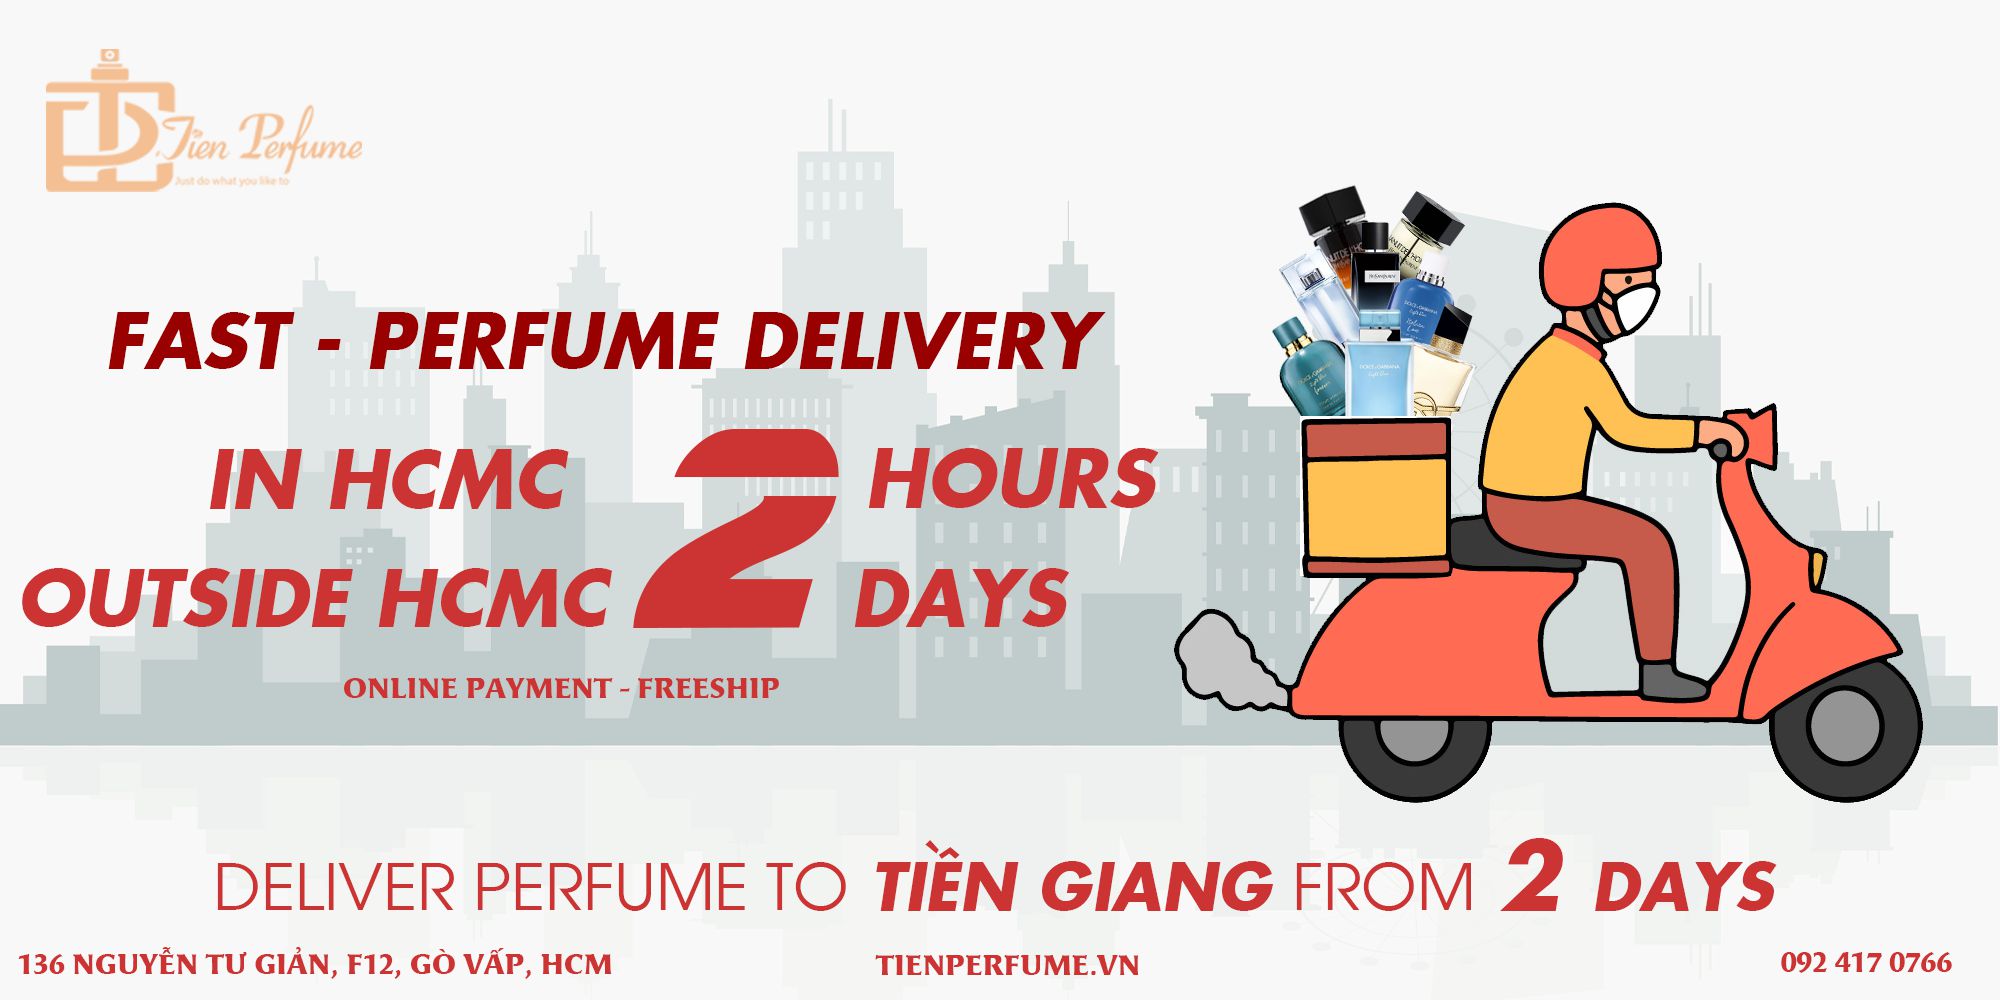 Deliver Perfume to Tiền Giang in 2 days Tiến Perfume authentic store